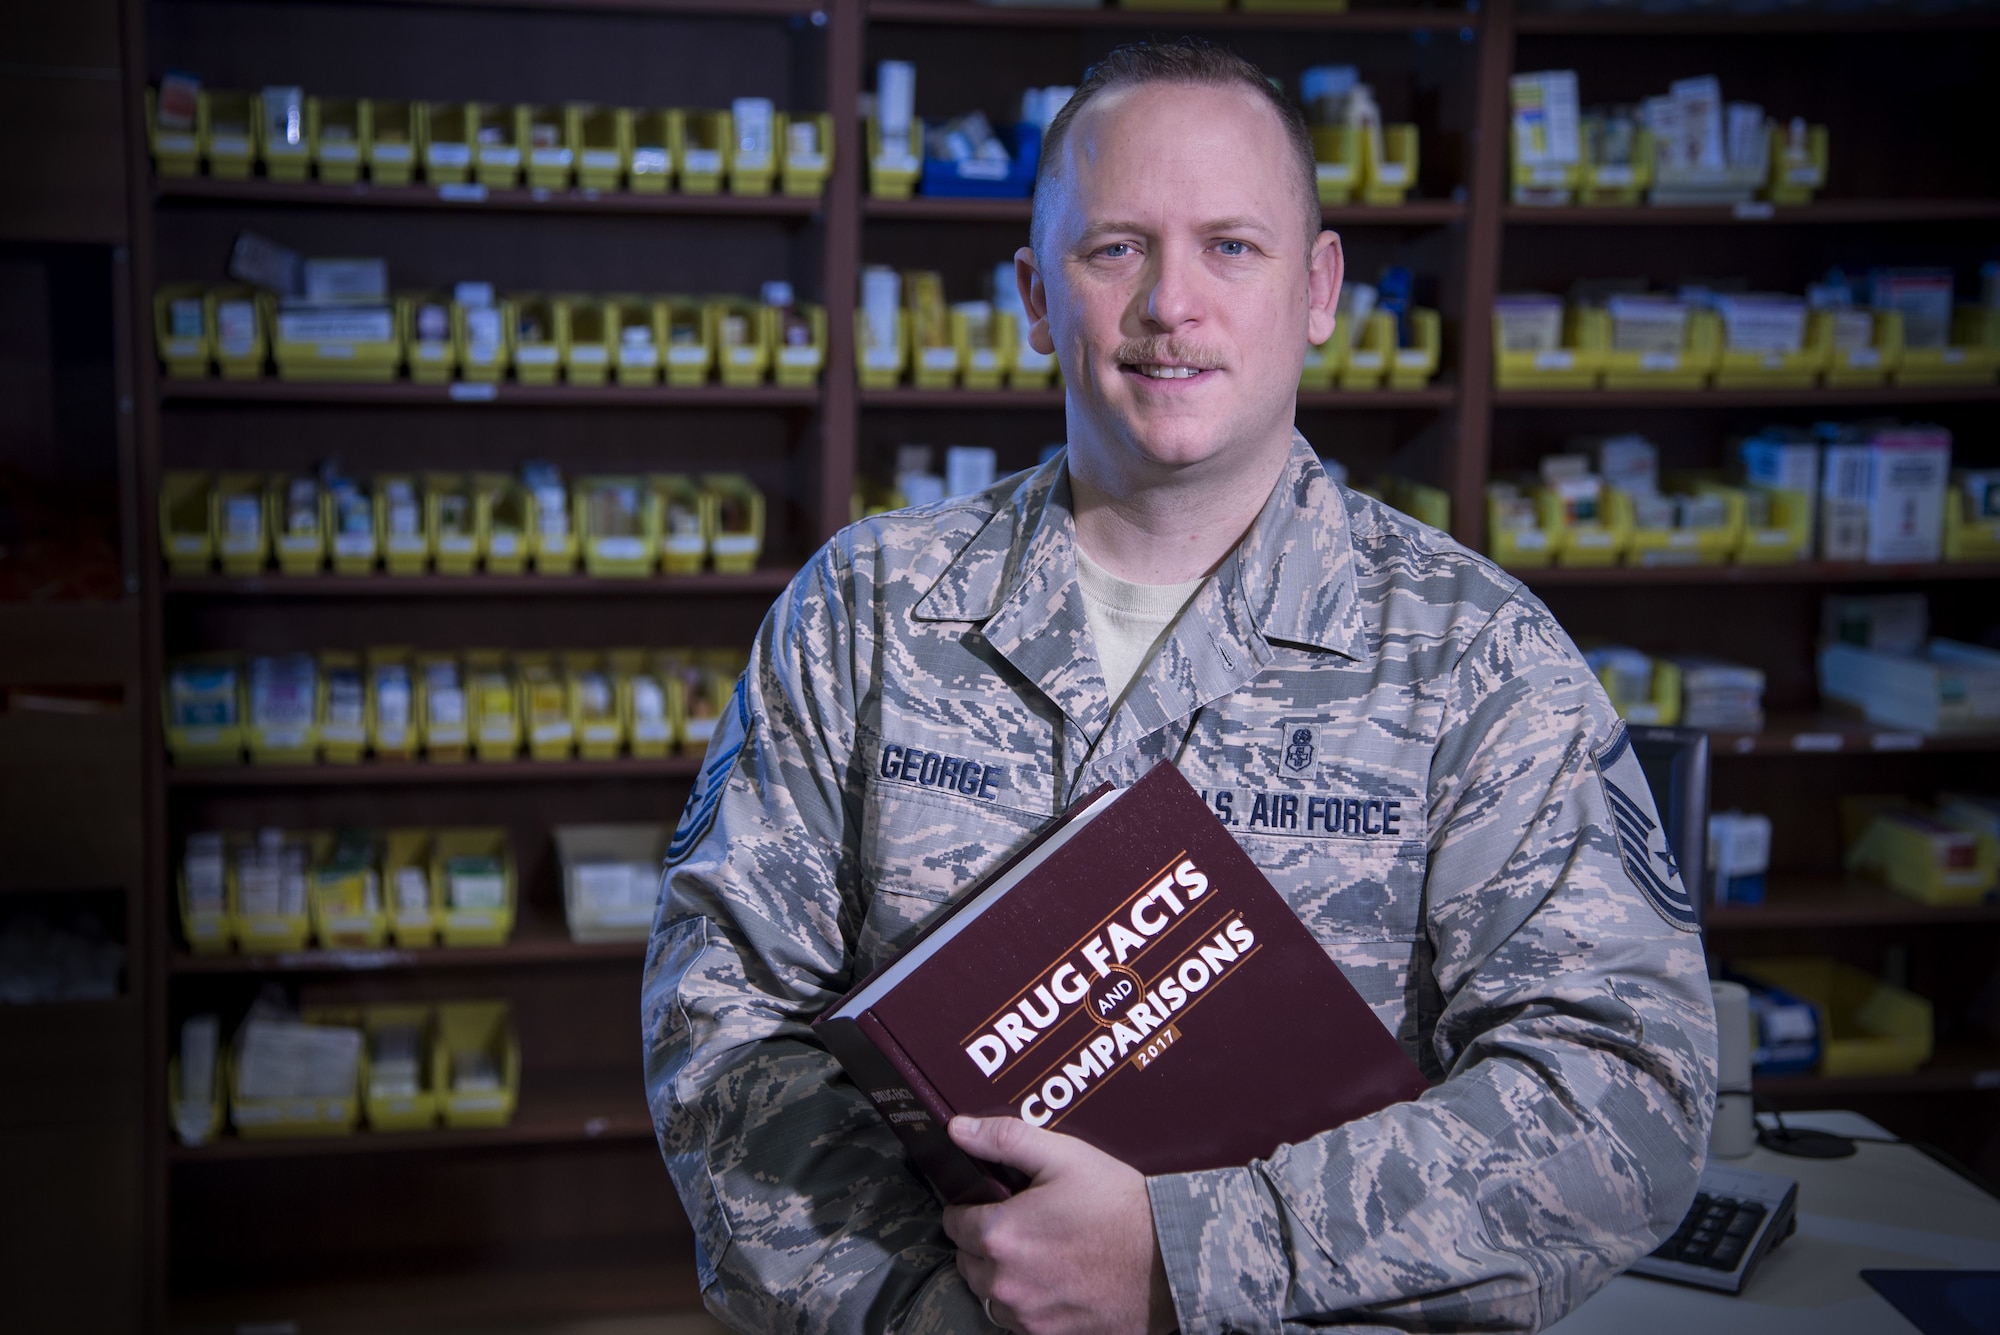 Master Sgt. Robert George, Medical Education & Training Campus pharmacy training senior enlisted leader, poses for a portrait at Joint Base San Antonio-Fort Sam Houston, Feb. 5, 2018. The Department of Defense’s pharmacy technician program prepares students to perform both inpatient and outpatient pharmacy operations in both traditional and non-traditional pharmacy practices. (U.S. Air Force photo by Sean M. Worrell)